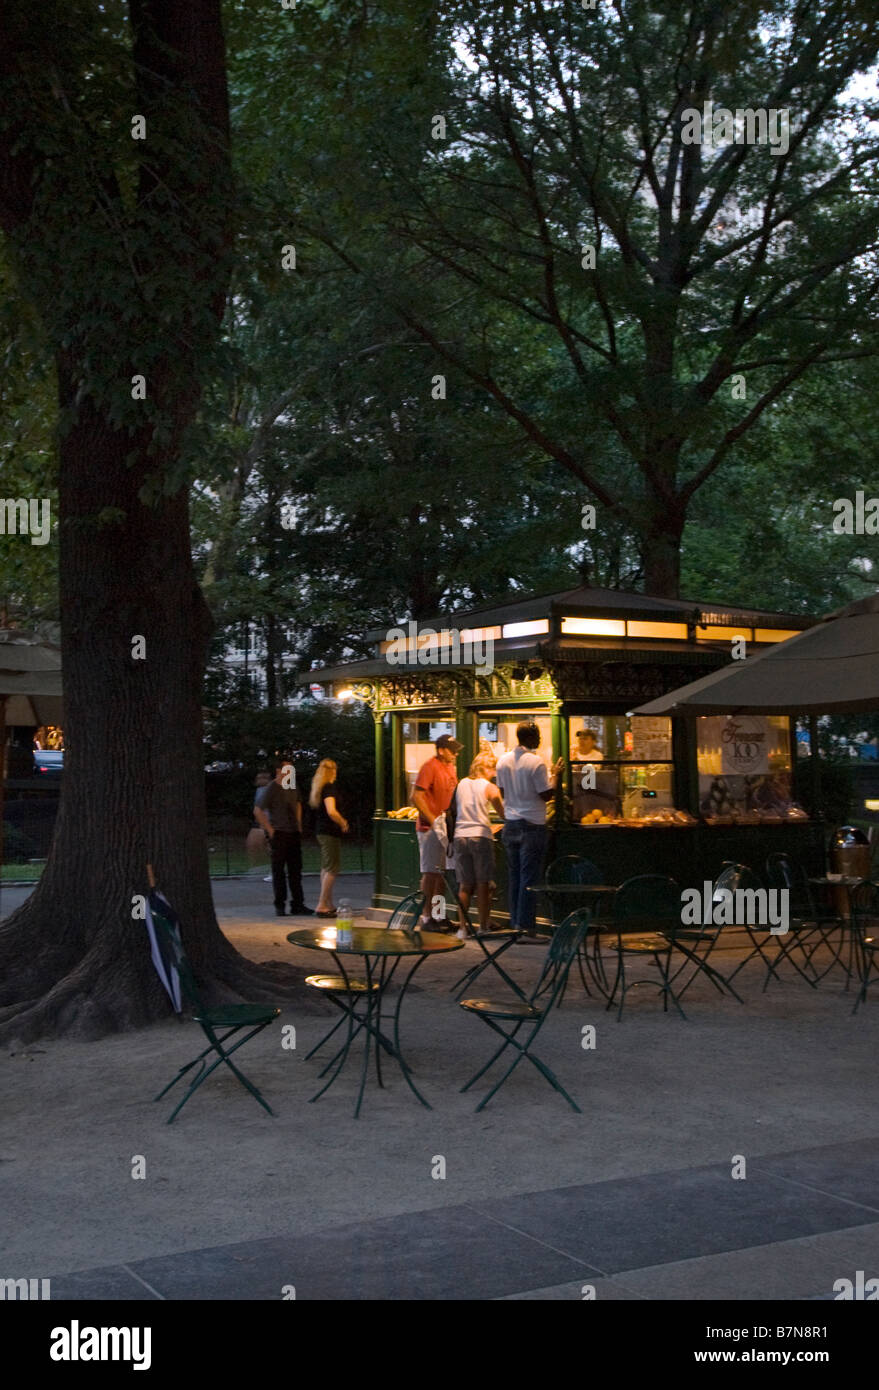 People buying from a concession stand in Central Park NYC at dusk Stock Photo